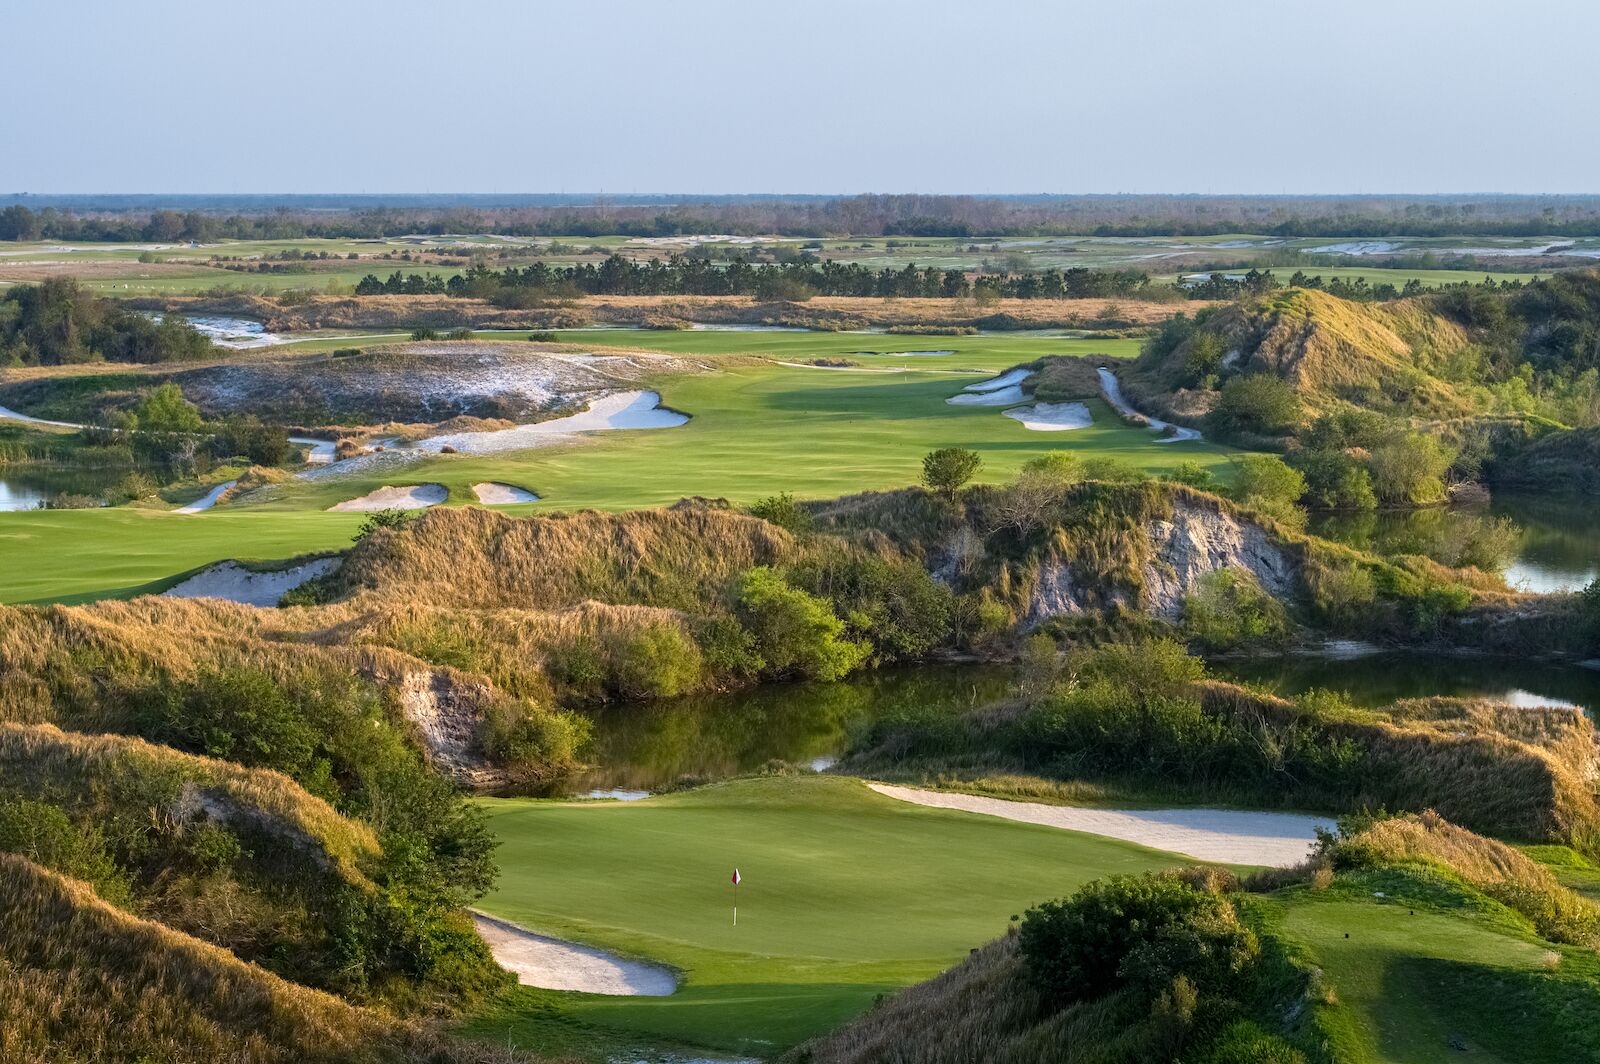 most-beautiful-golf-courses-in-florida